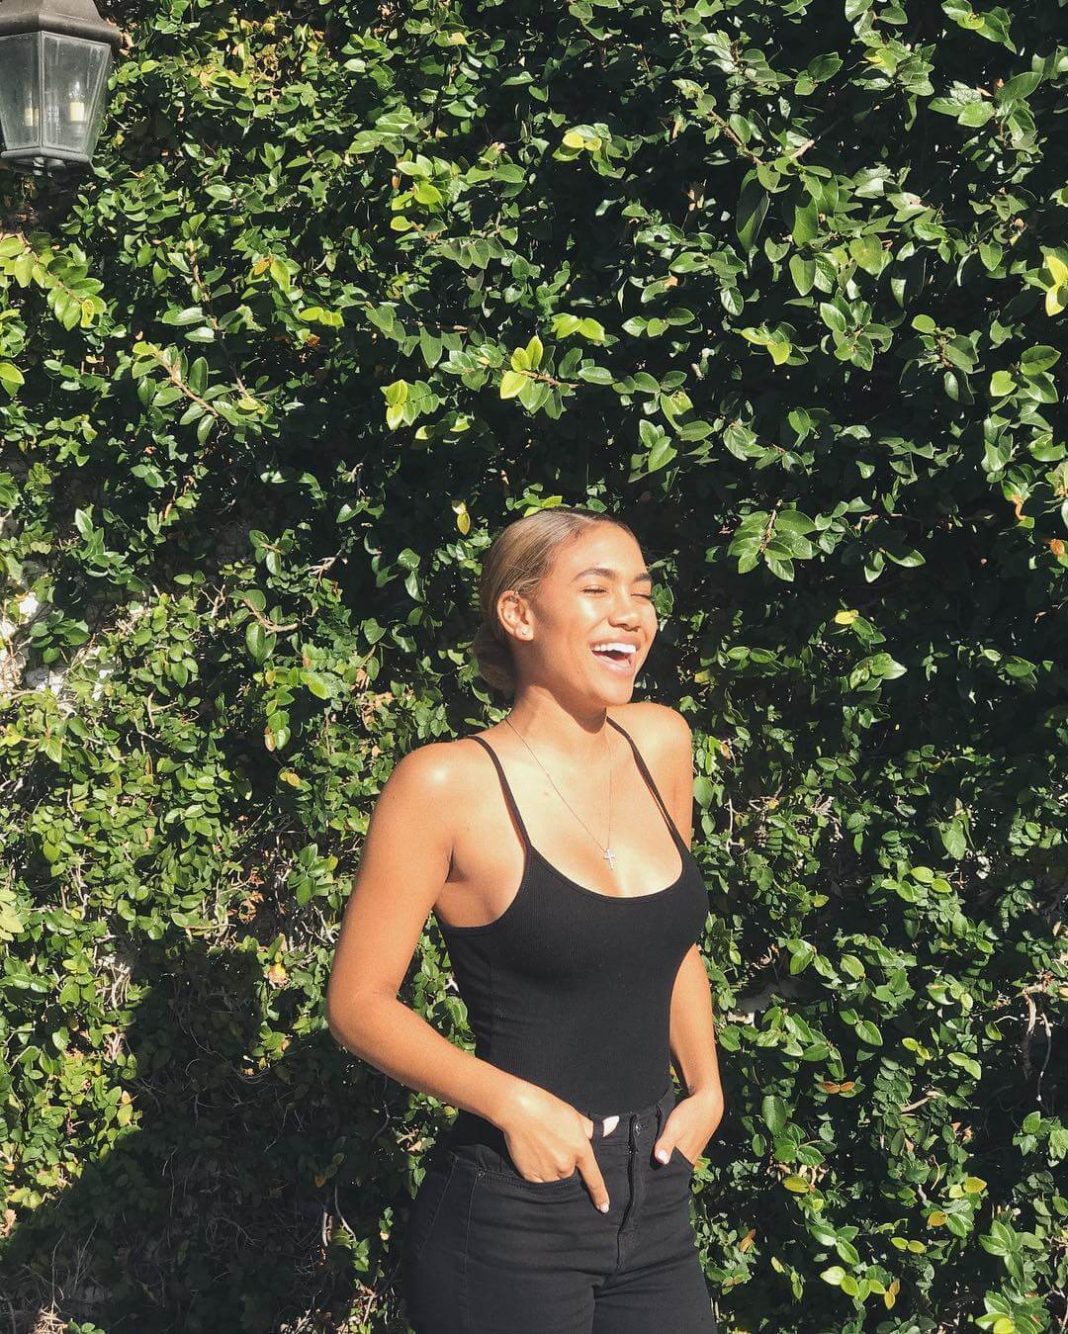 51 Paige Hurd Nude Pictures Which Makes Her An Enigmatic Glamor Quotient 211